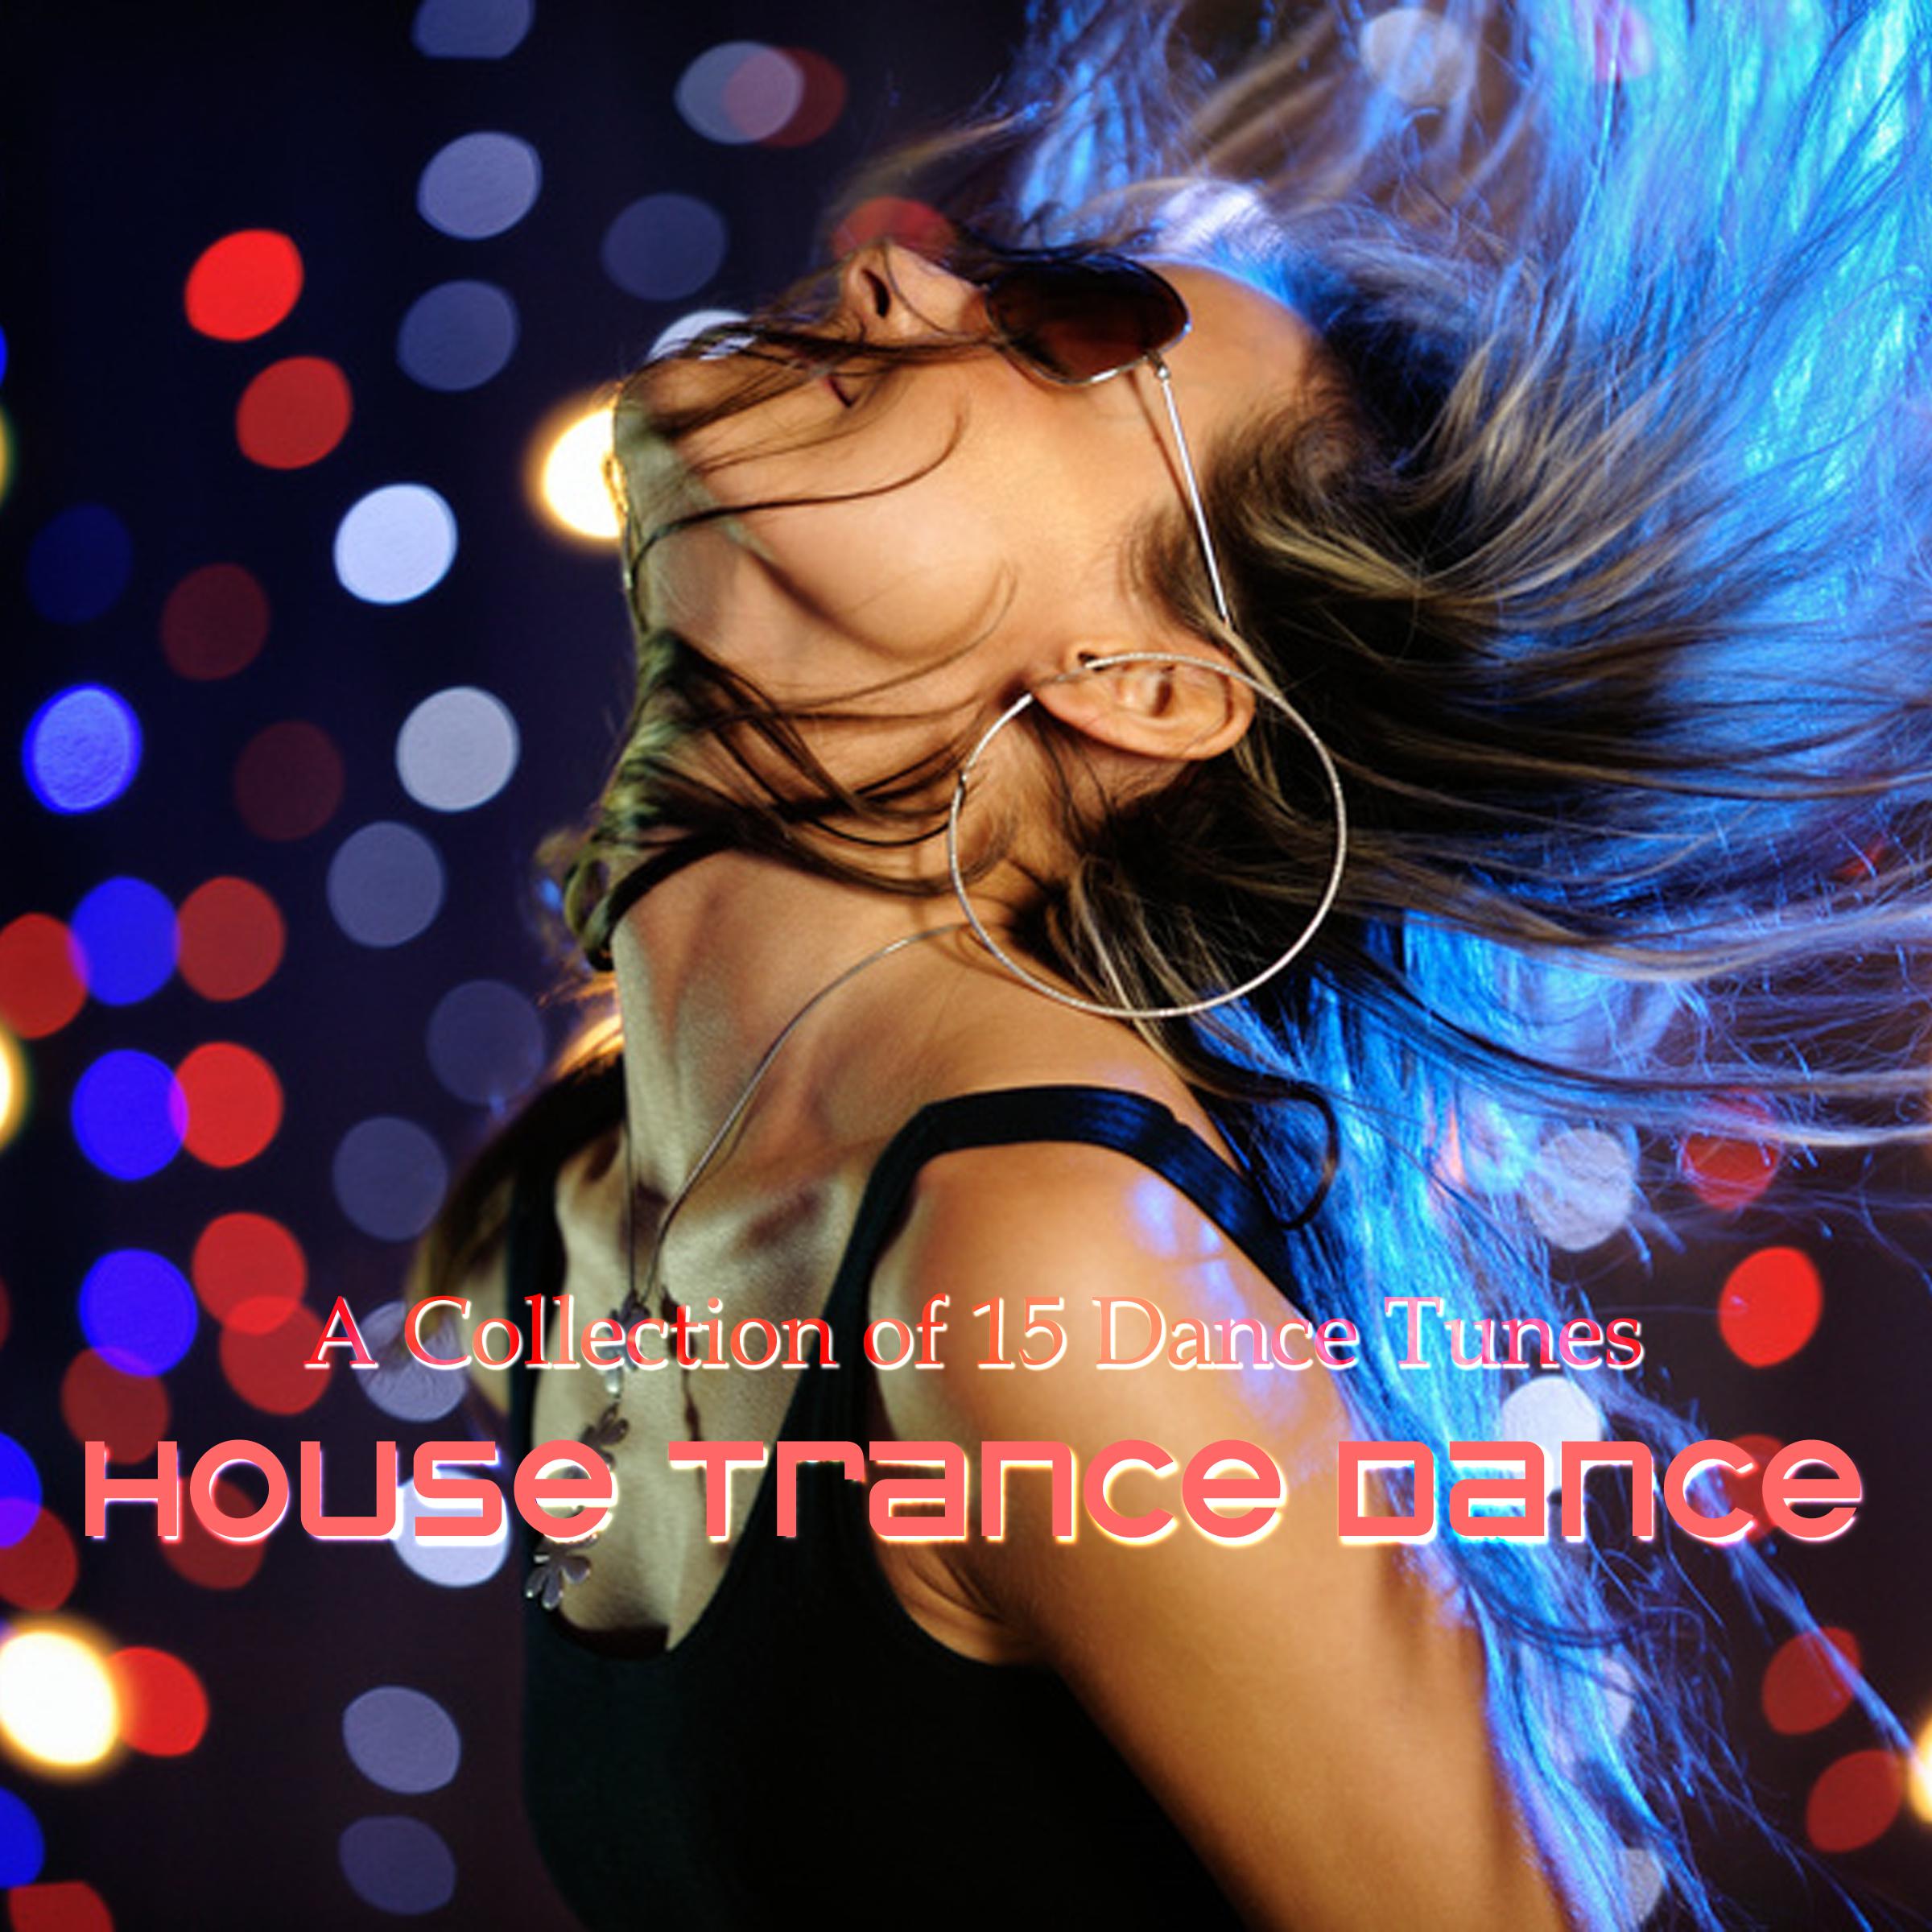 House Trance Dance (A Collection of 15 Dance Tunes)